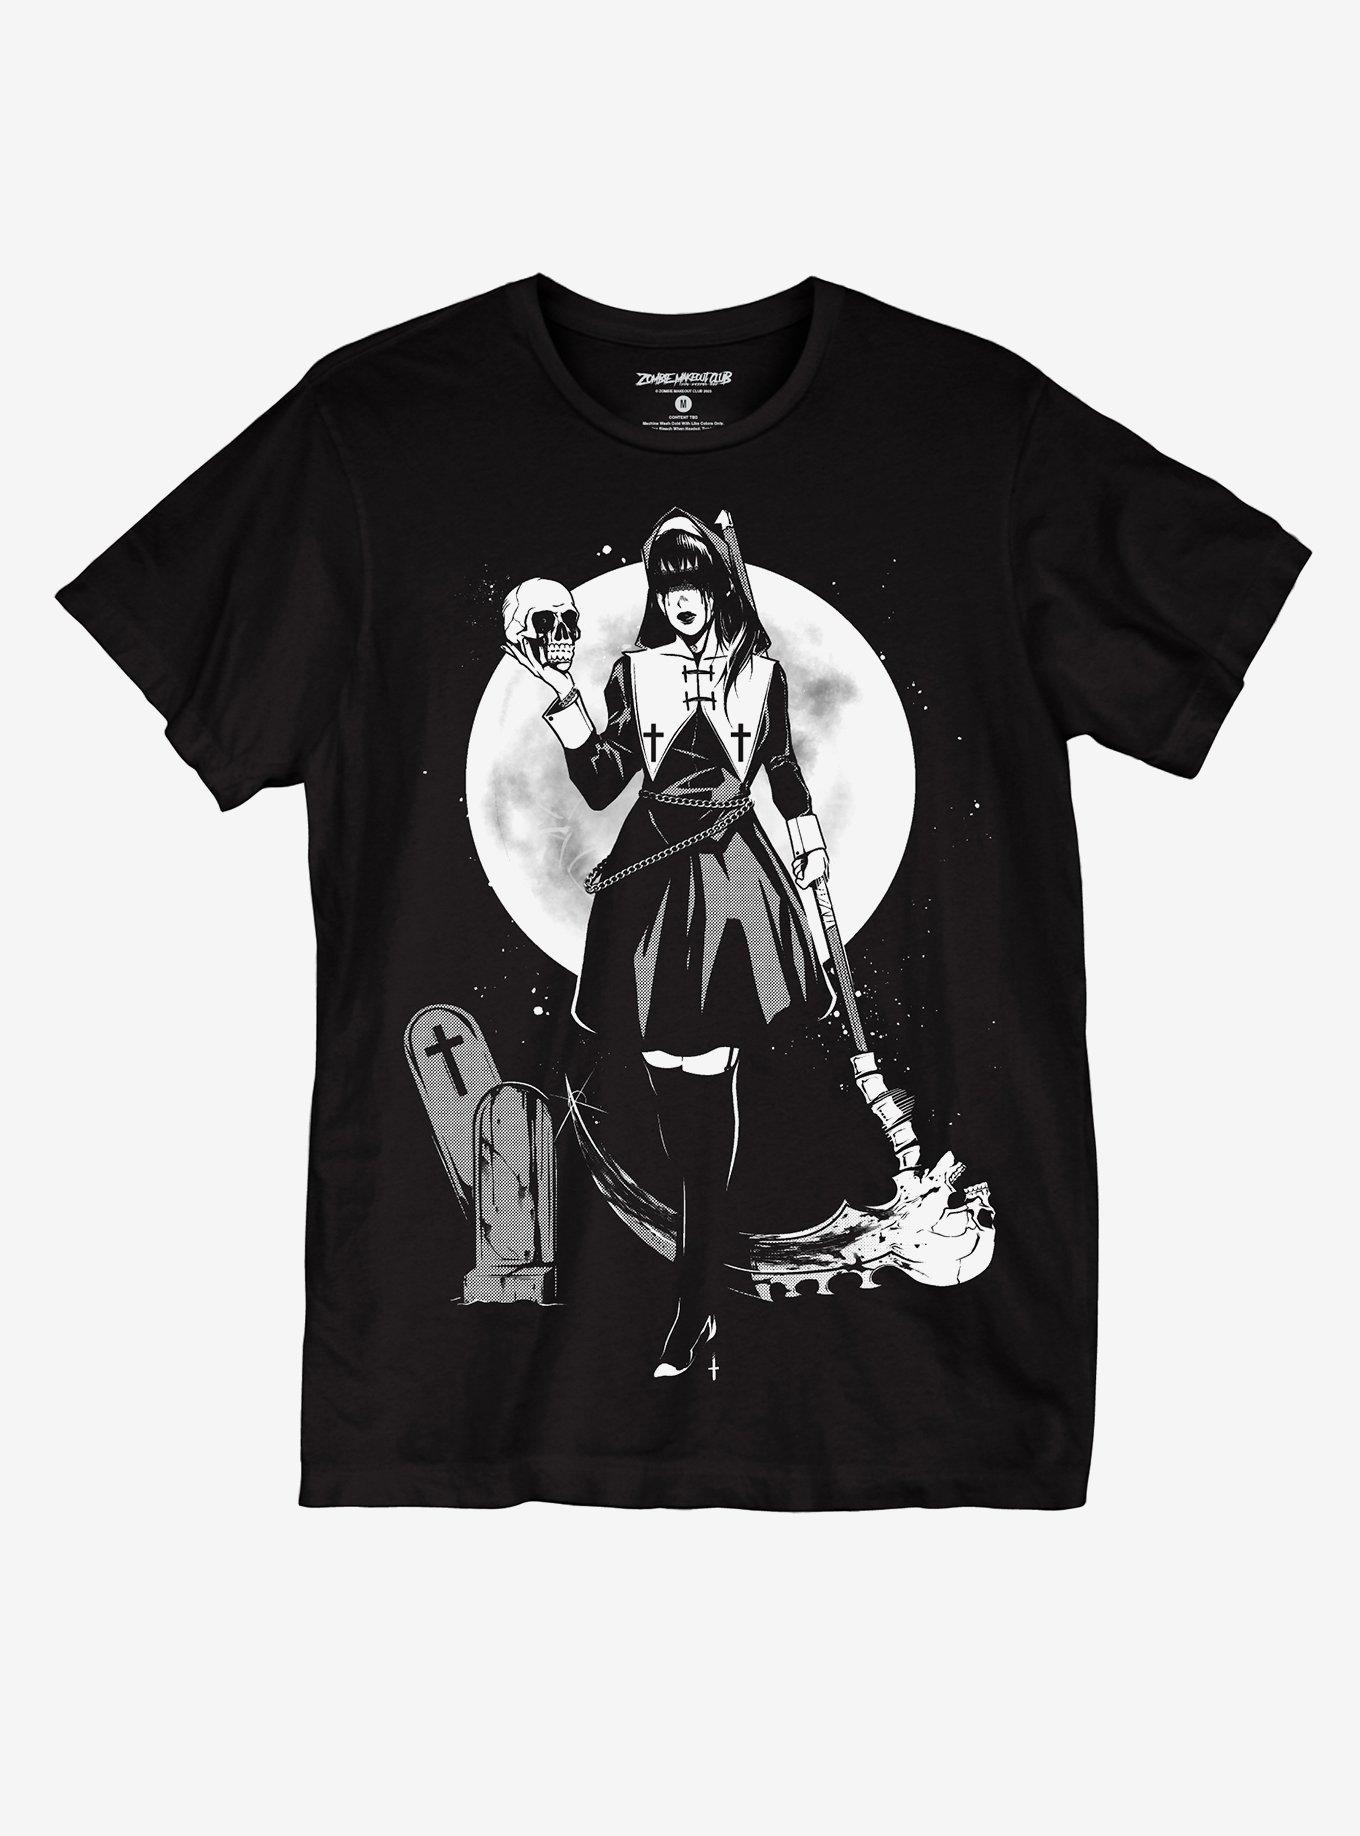 Grim Reaper Girl T-Shirt By Zombie Makeout Club, BLACK, hi-res